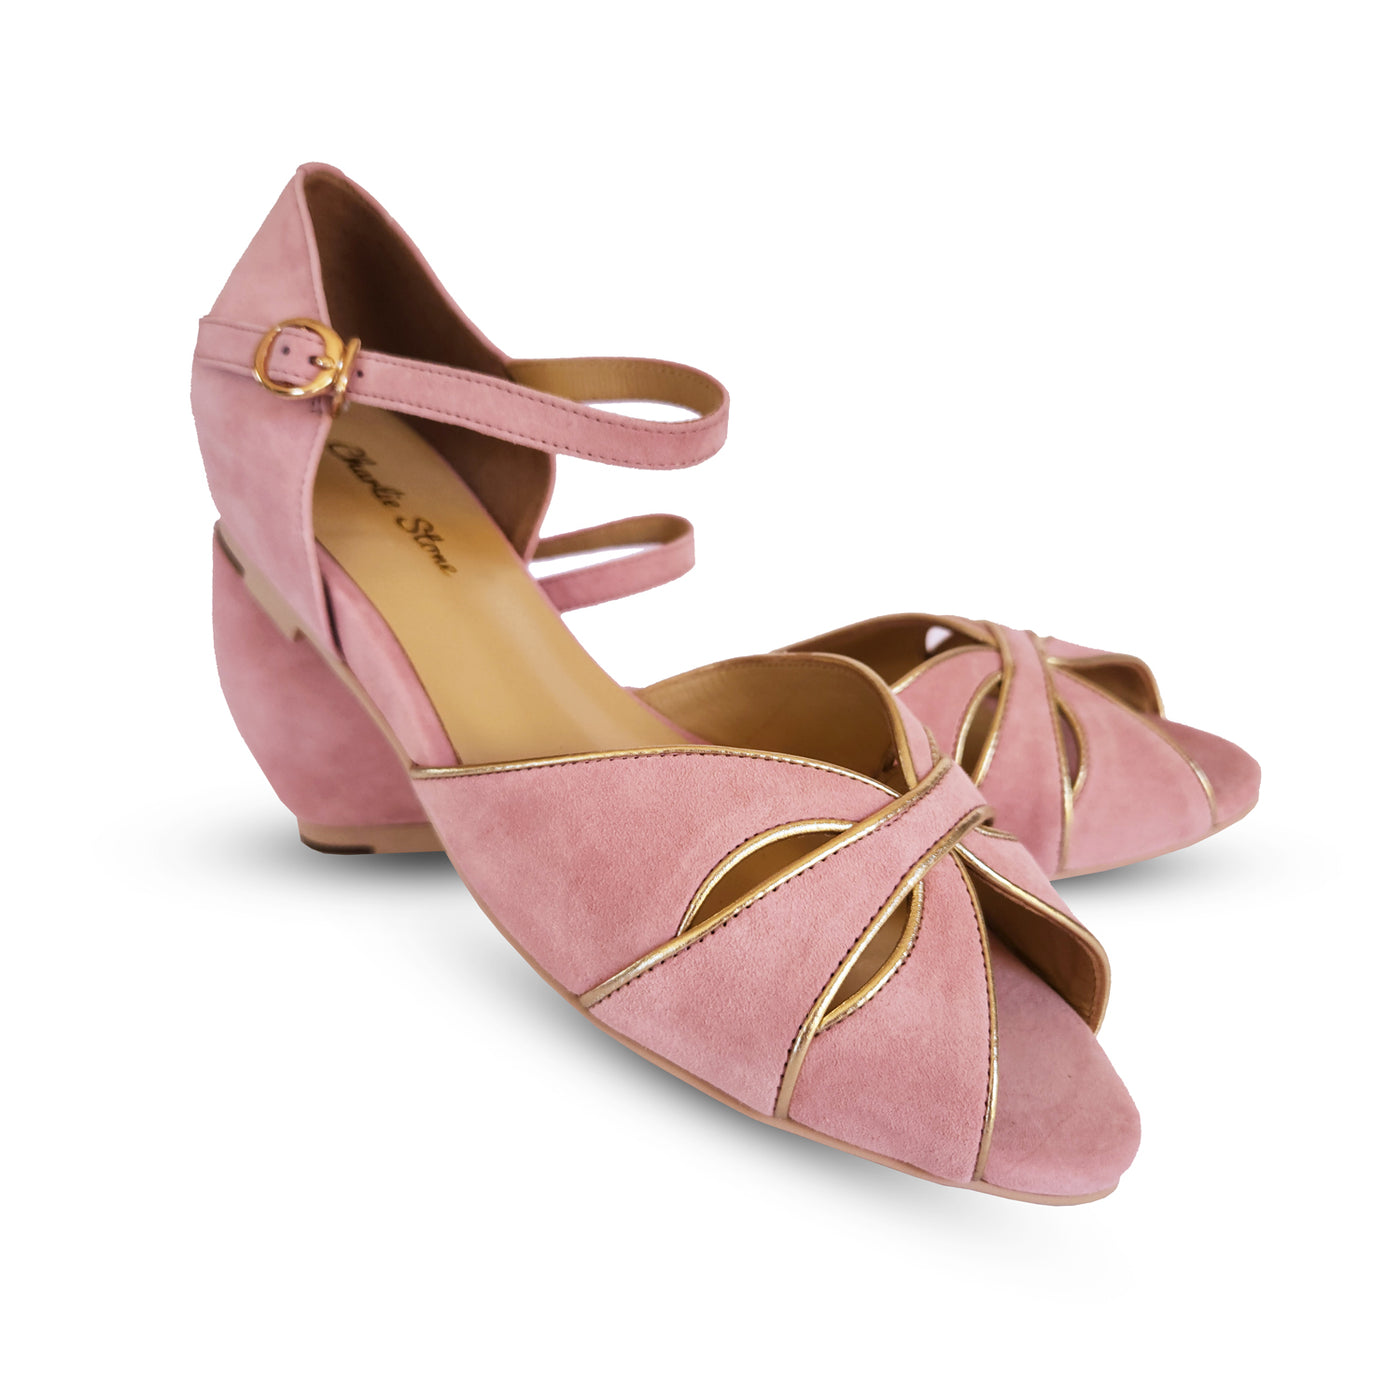 Charlie Stone Shoes Athina blush suede leather flats retro Greece inspired summer sandals perfect for sight seeing and walking